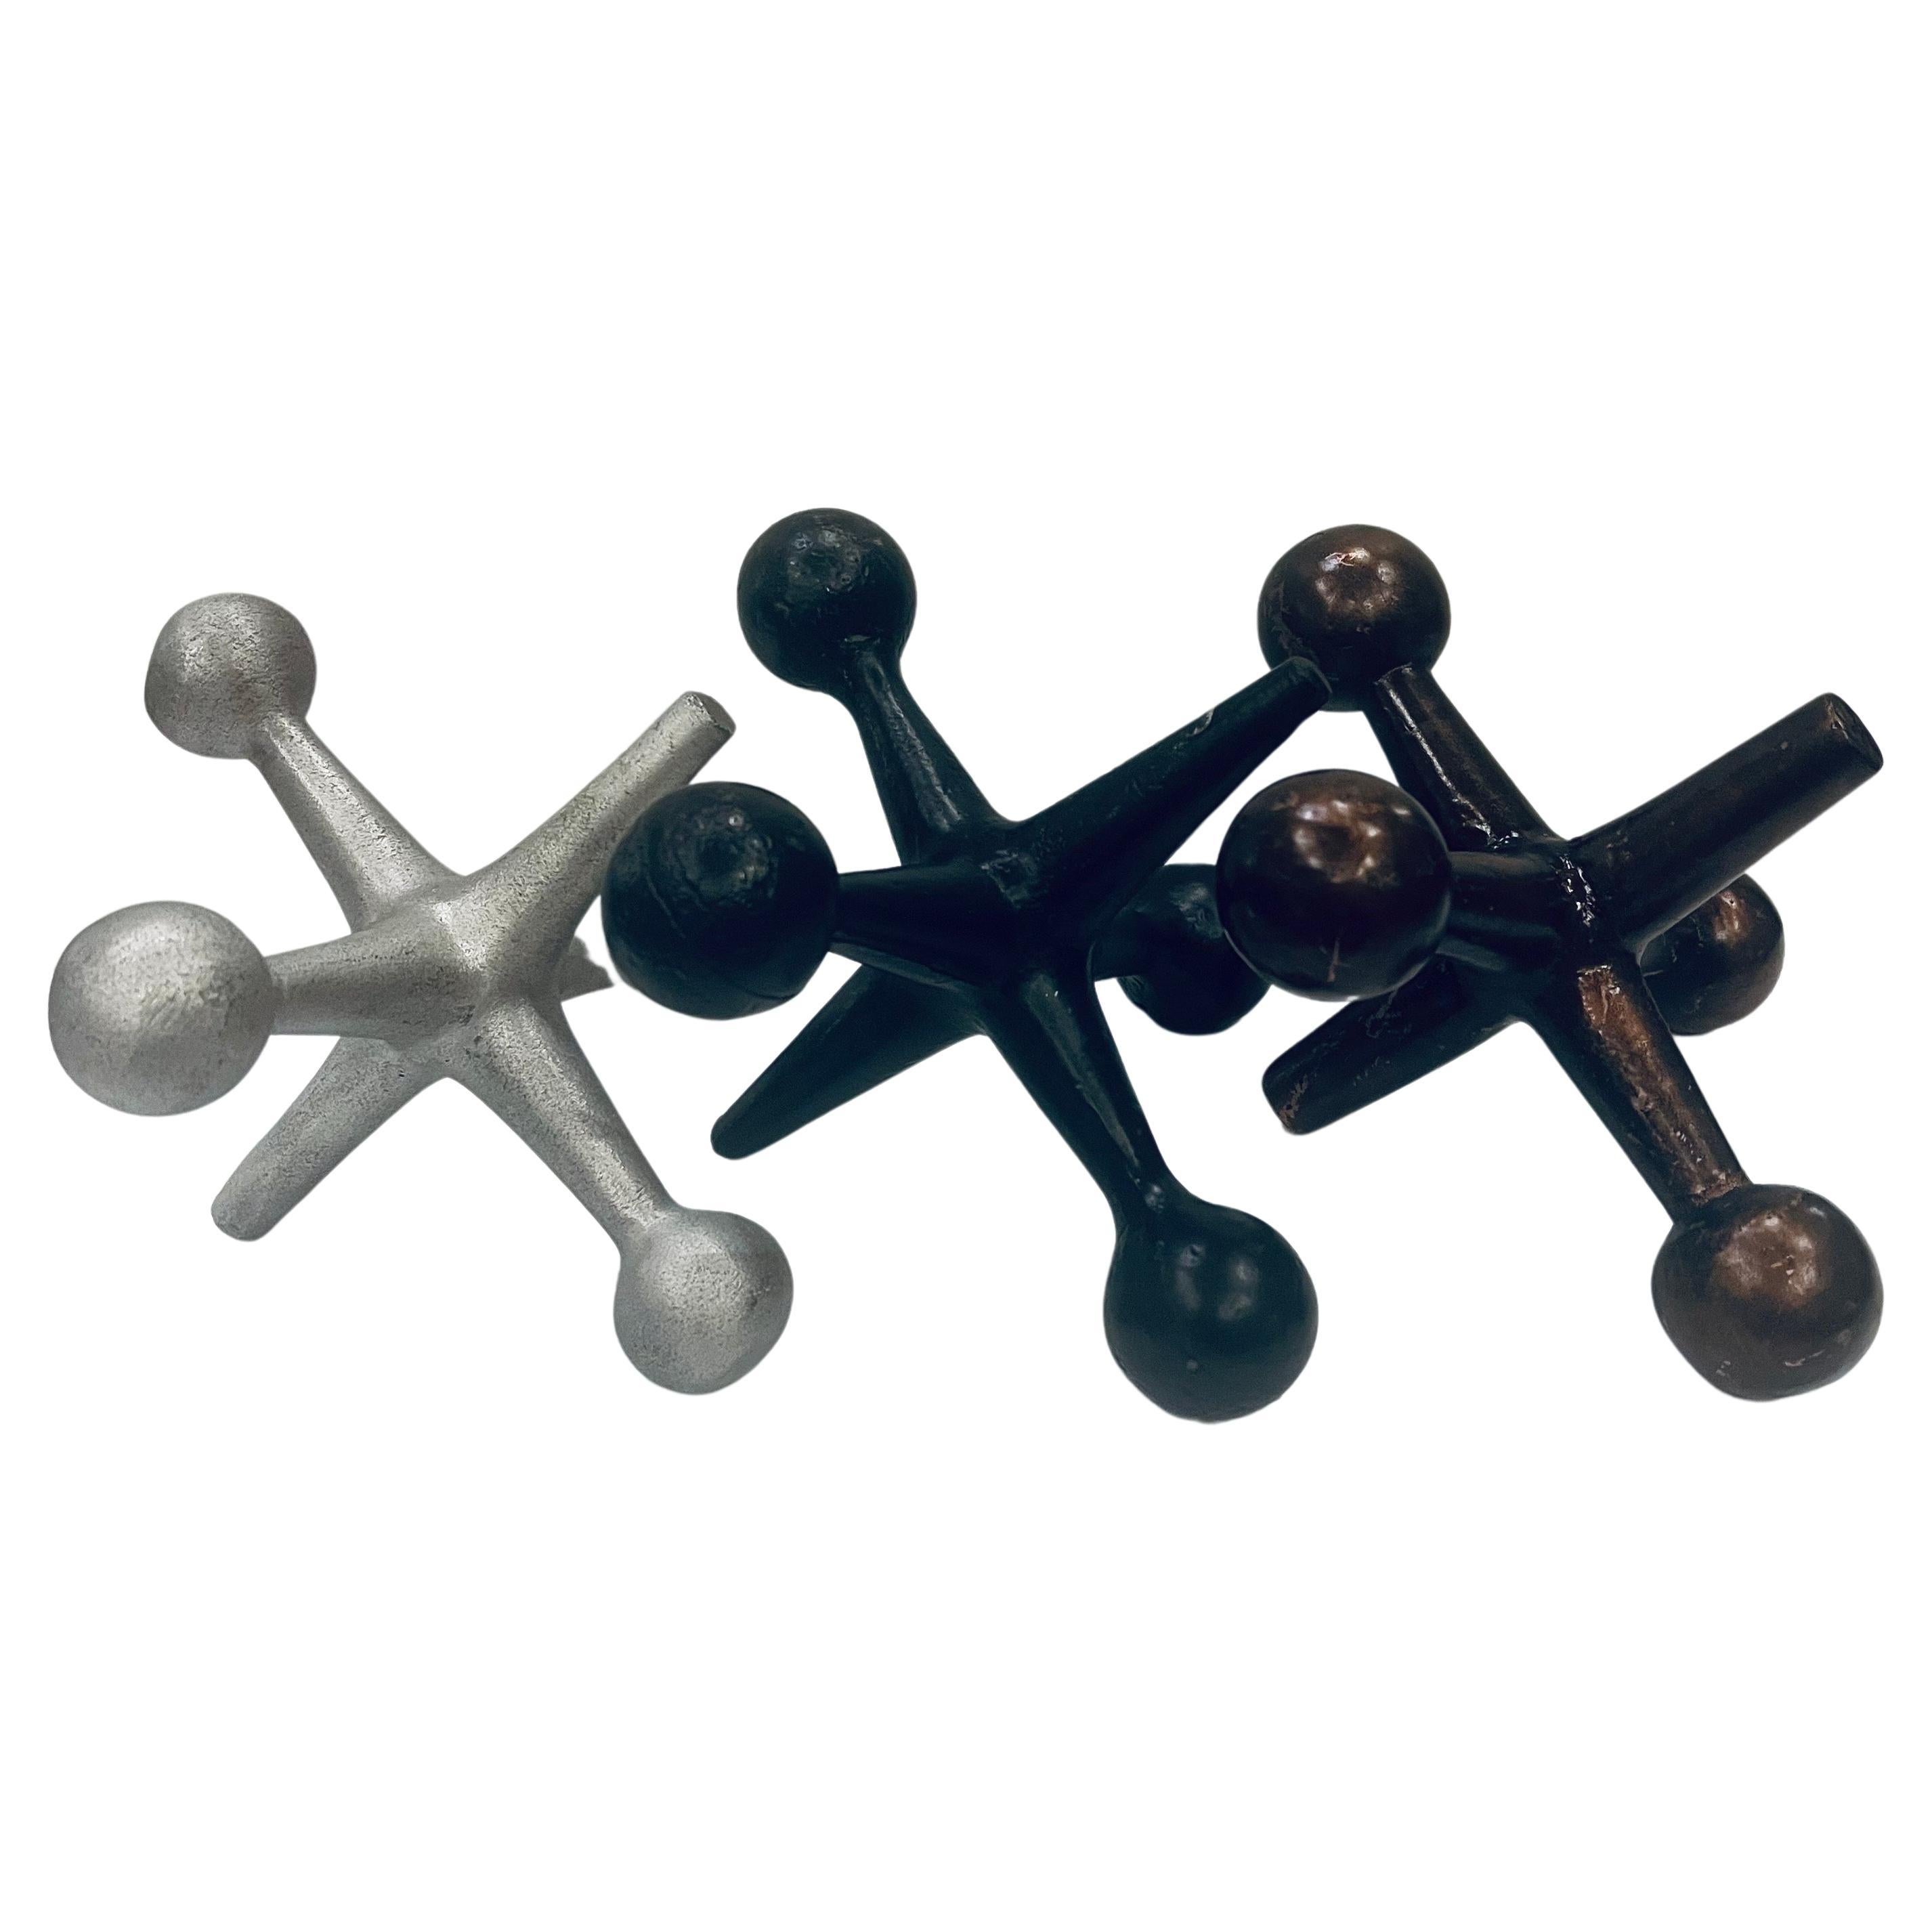 Set of three 1950s atomic era, Mid-Century Modern iron jacks-jax. The pieces can be used as bookends, a doorstop, or decorative accents. in aluminum, black and bronze finish with a nice well-worn patina.